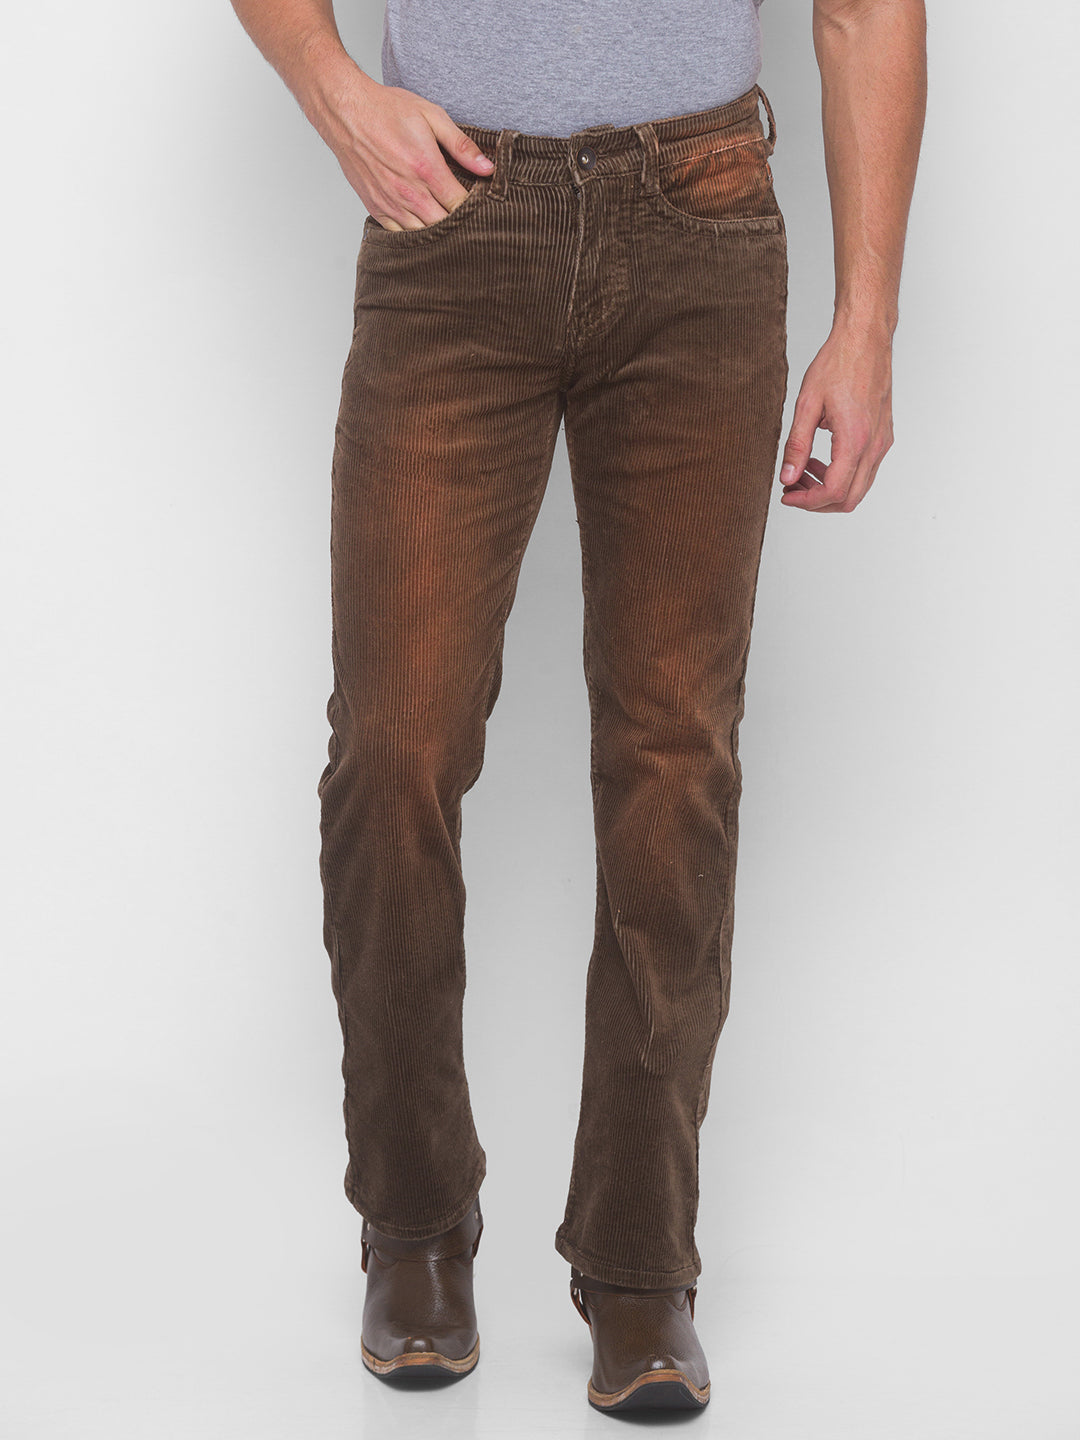 Chocolate Brown Bootcut Corduroy Trousers